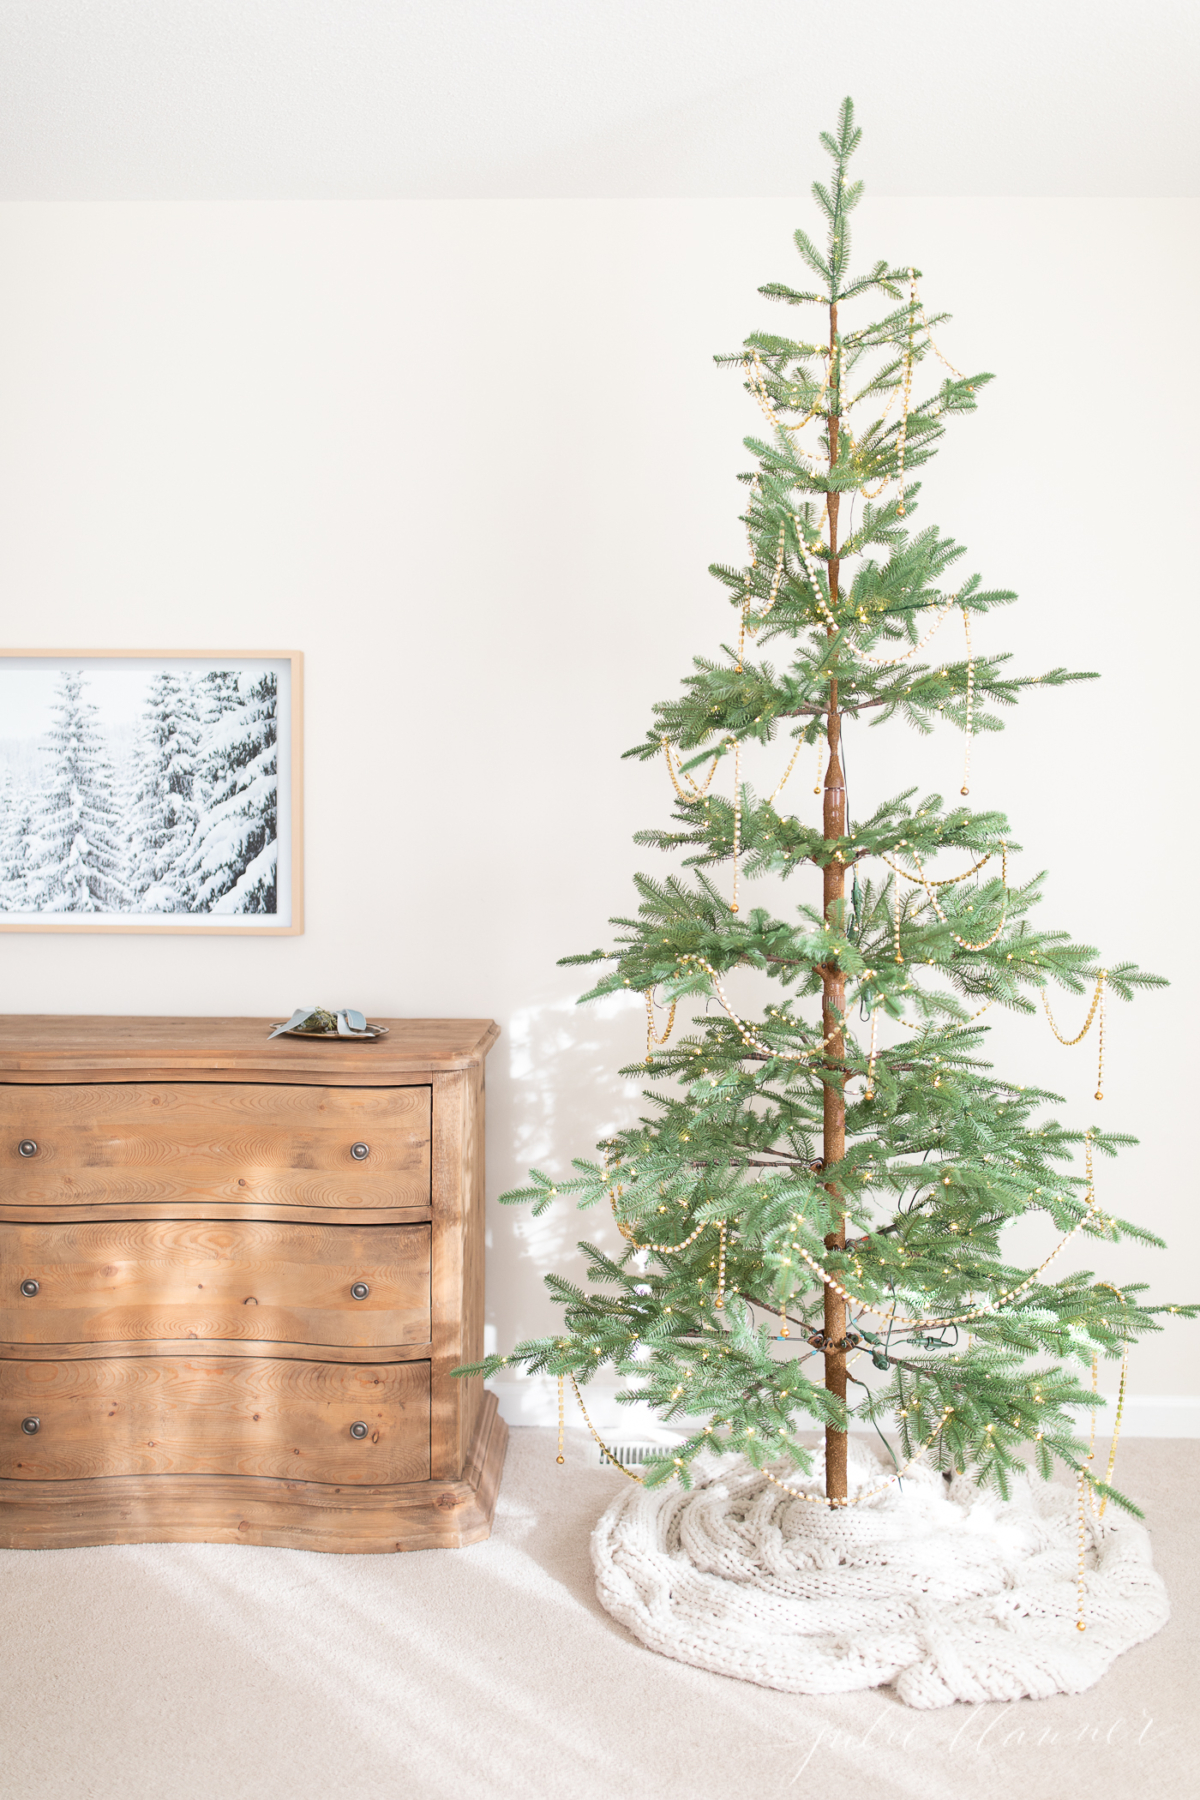 A sparse Christmas tree stands in a room alongside a dresser.